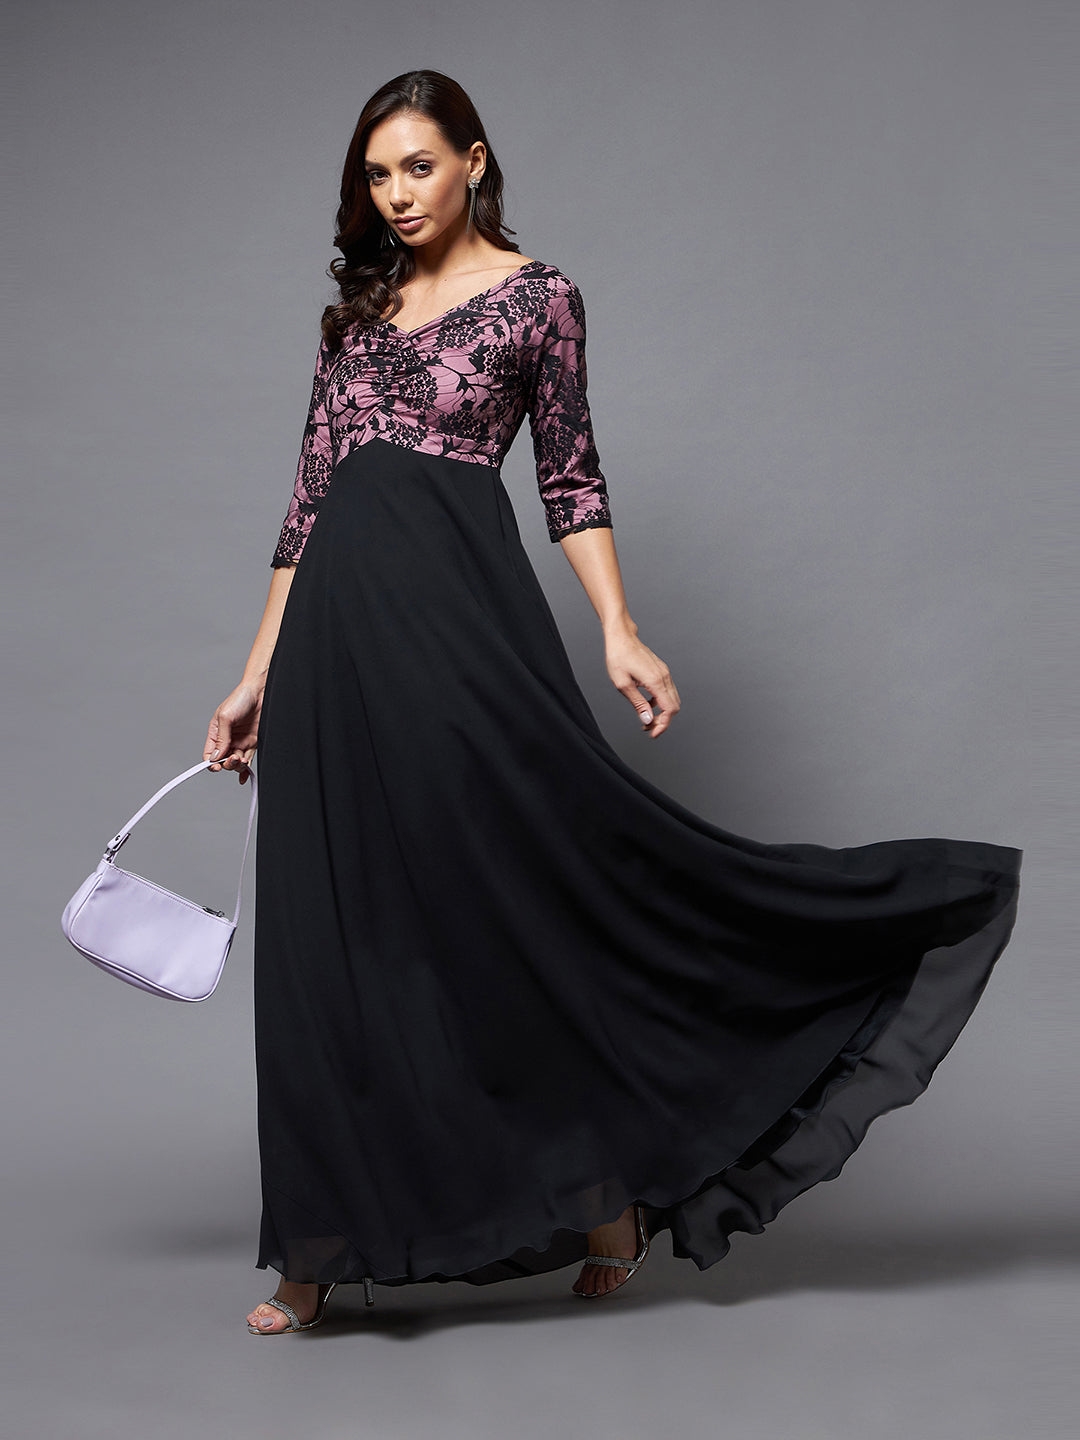 Black And Lavender Sweet heart neck 3/4 Sleeve Self Design Fit & Flare Maxi Dress